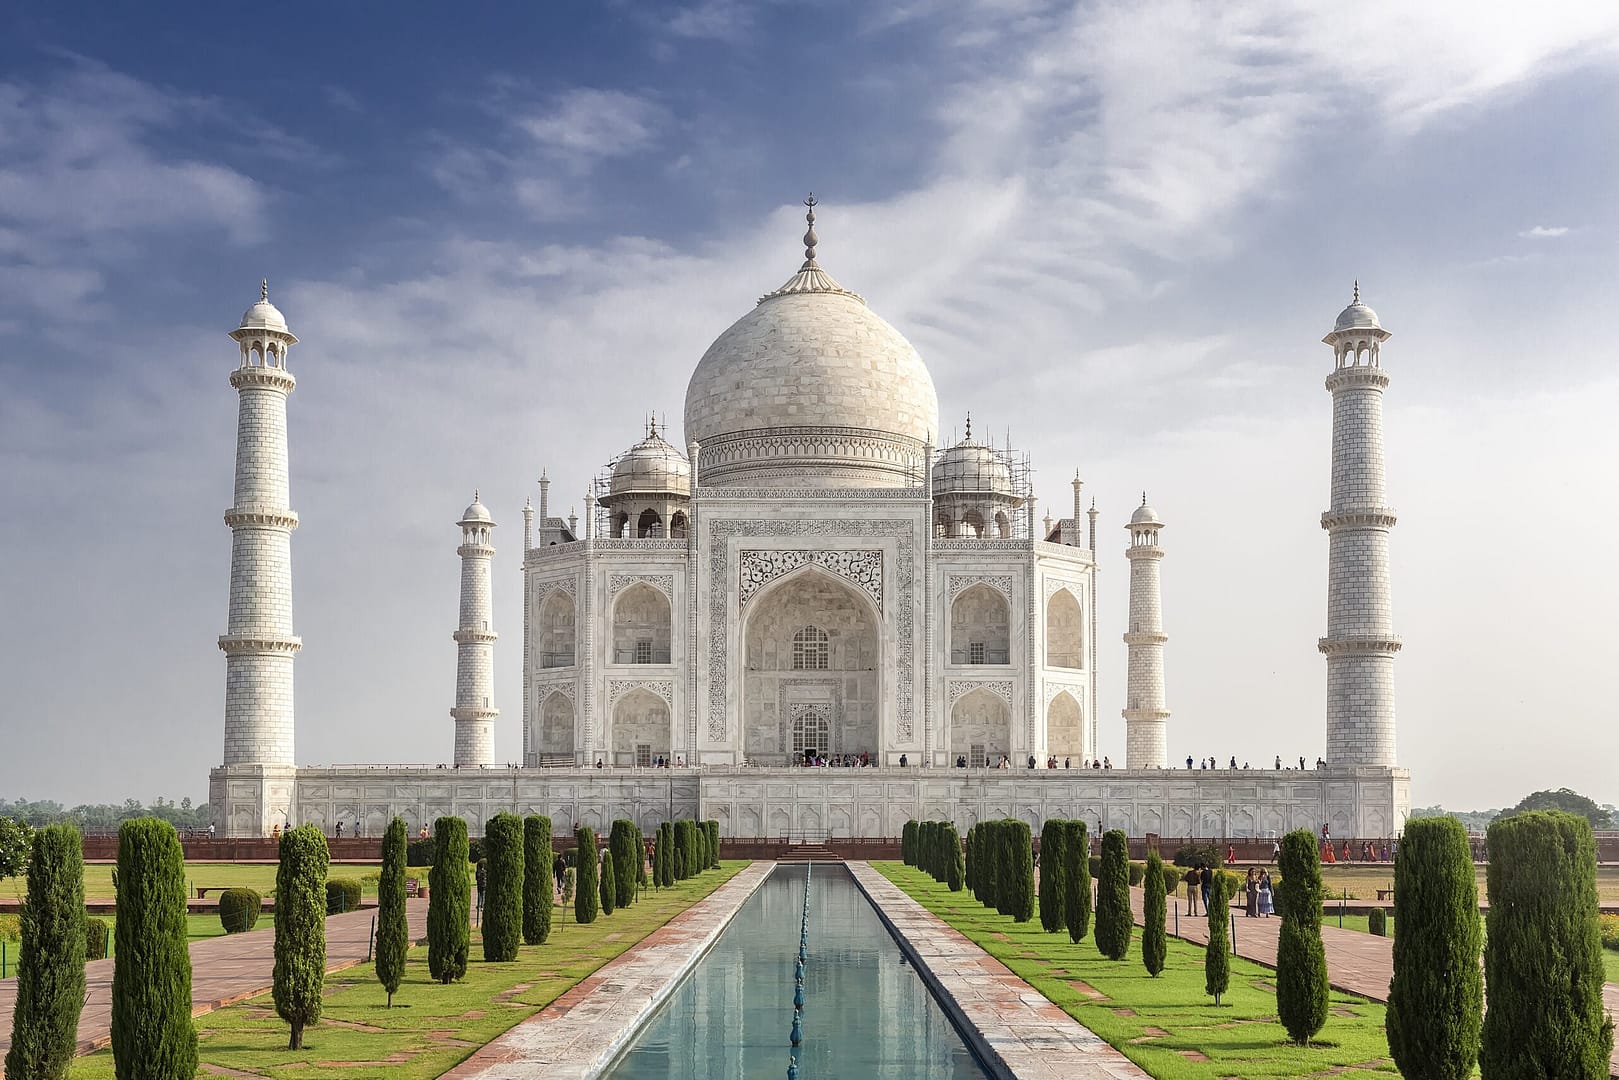 Ivory-white marble Taj Mahal glowing in the sunlight, surrounded by lush gardens.